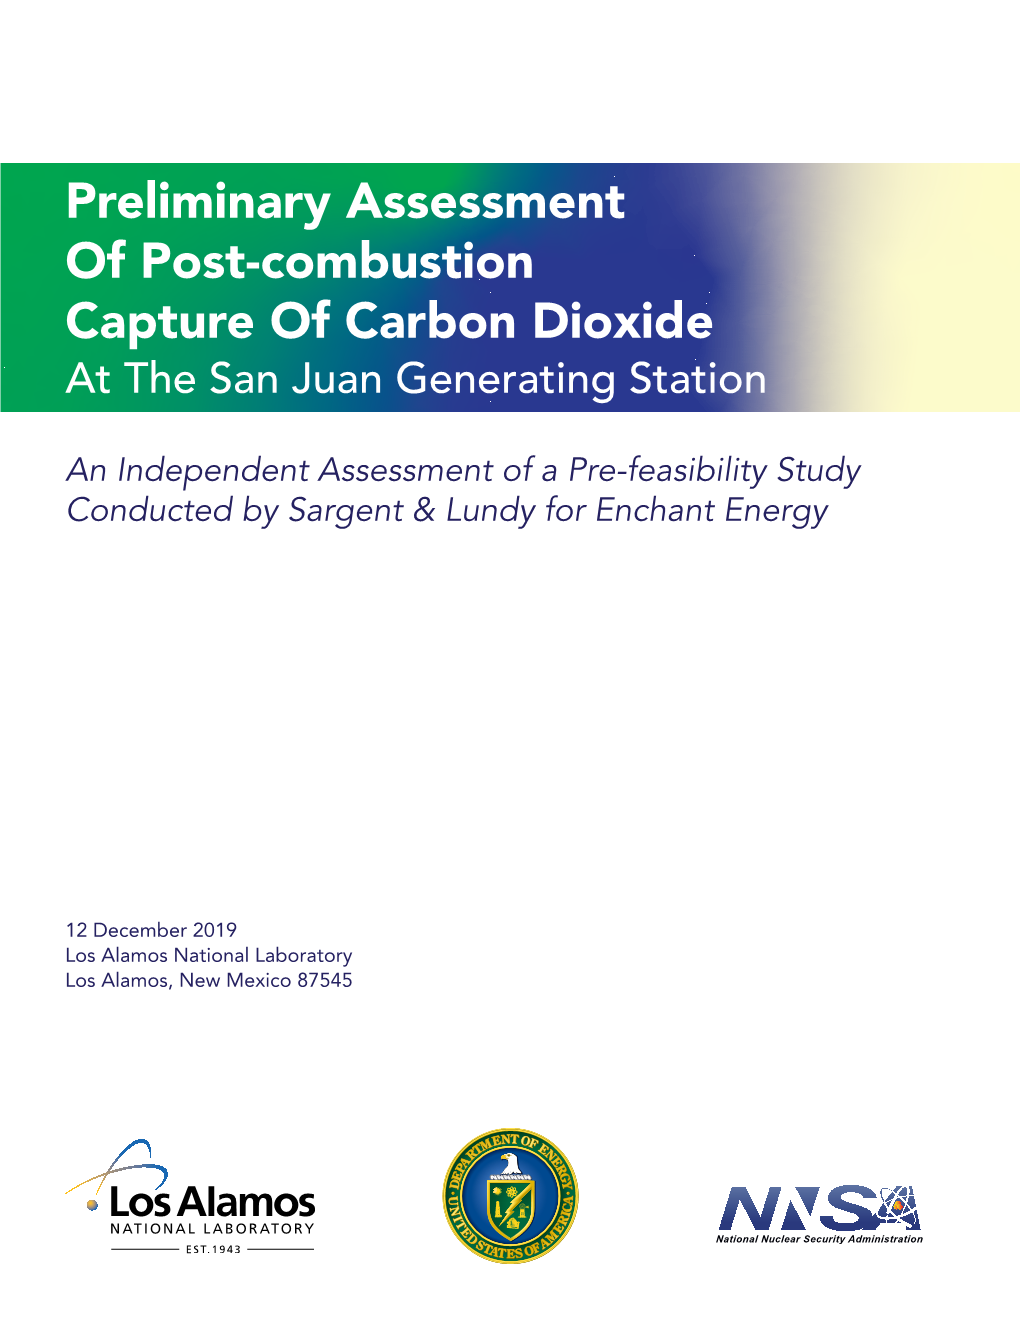 View the Preliminary Assessment of Post-Combustion Capture of Carbon Dioxide at the San Juan Generating